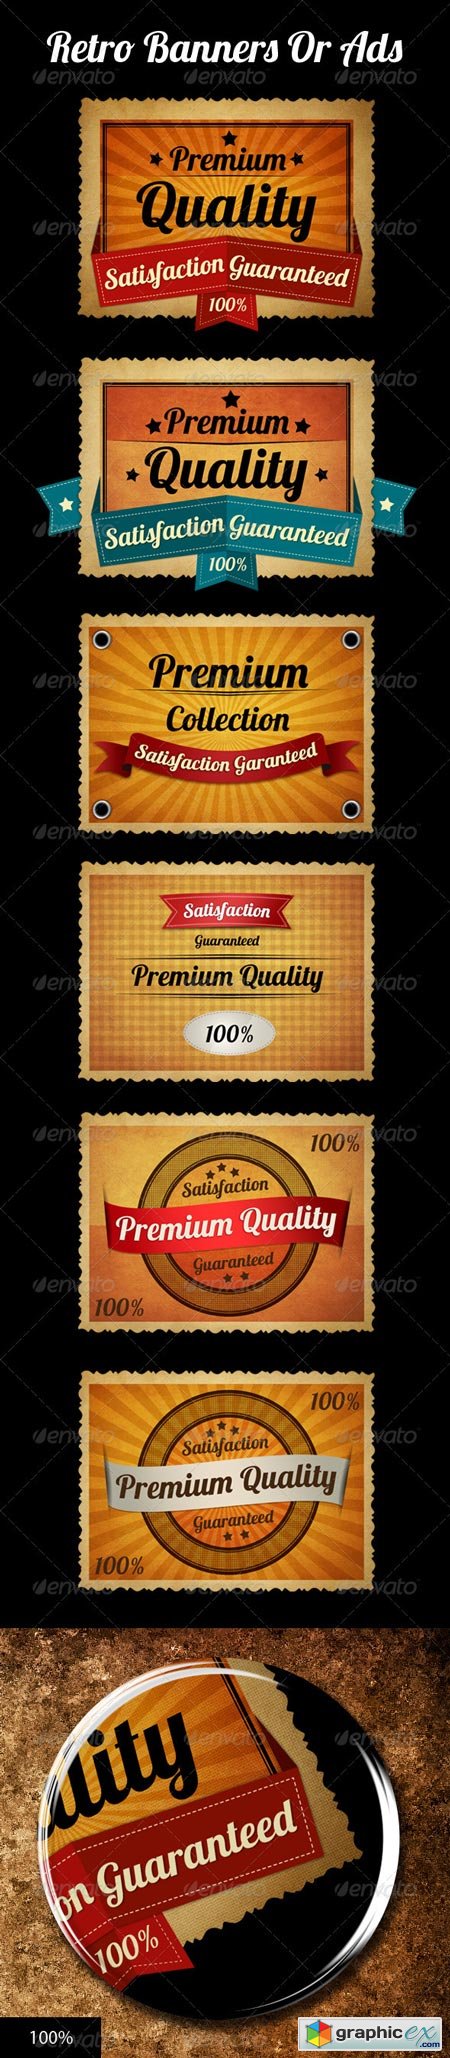 Retro Banners or Ads 1186304